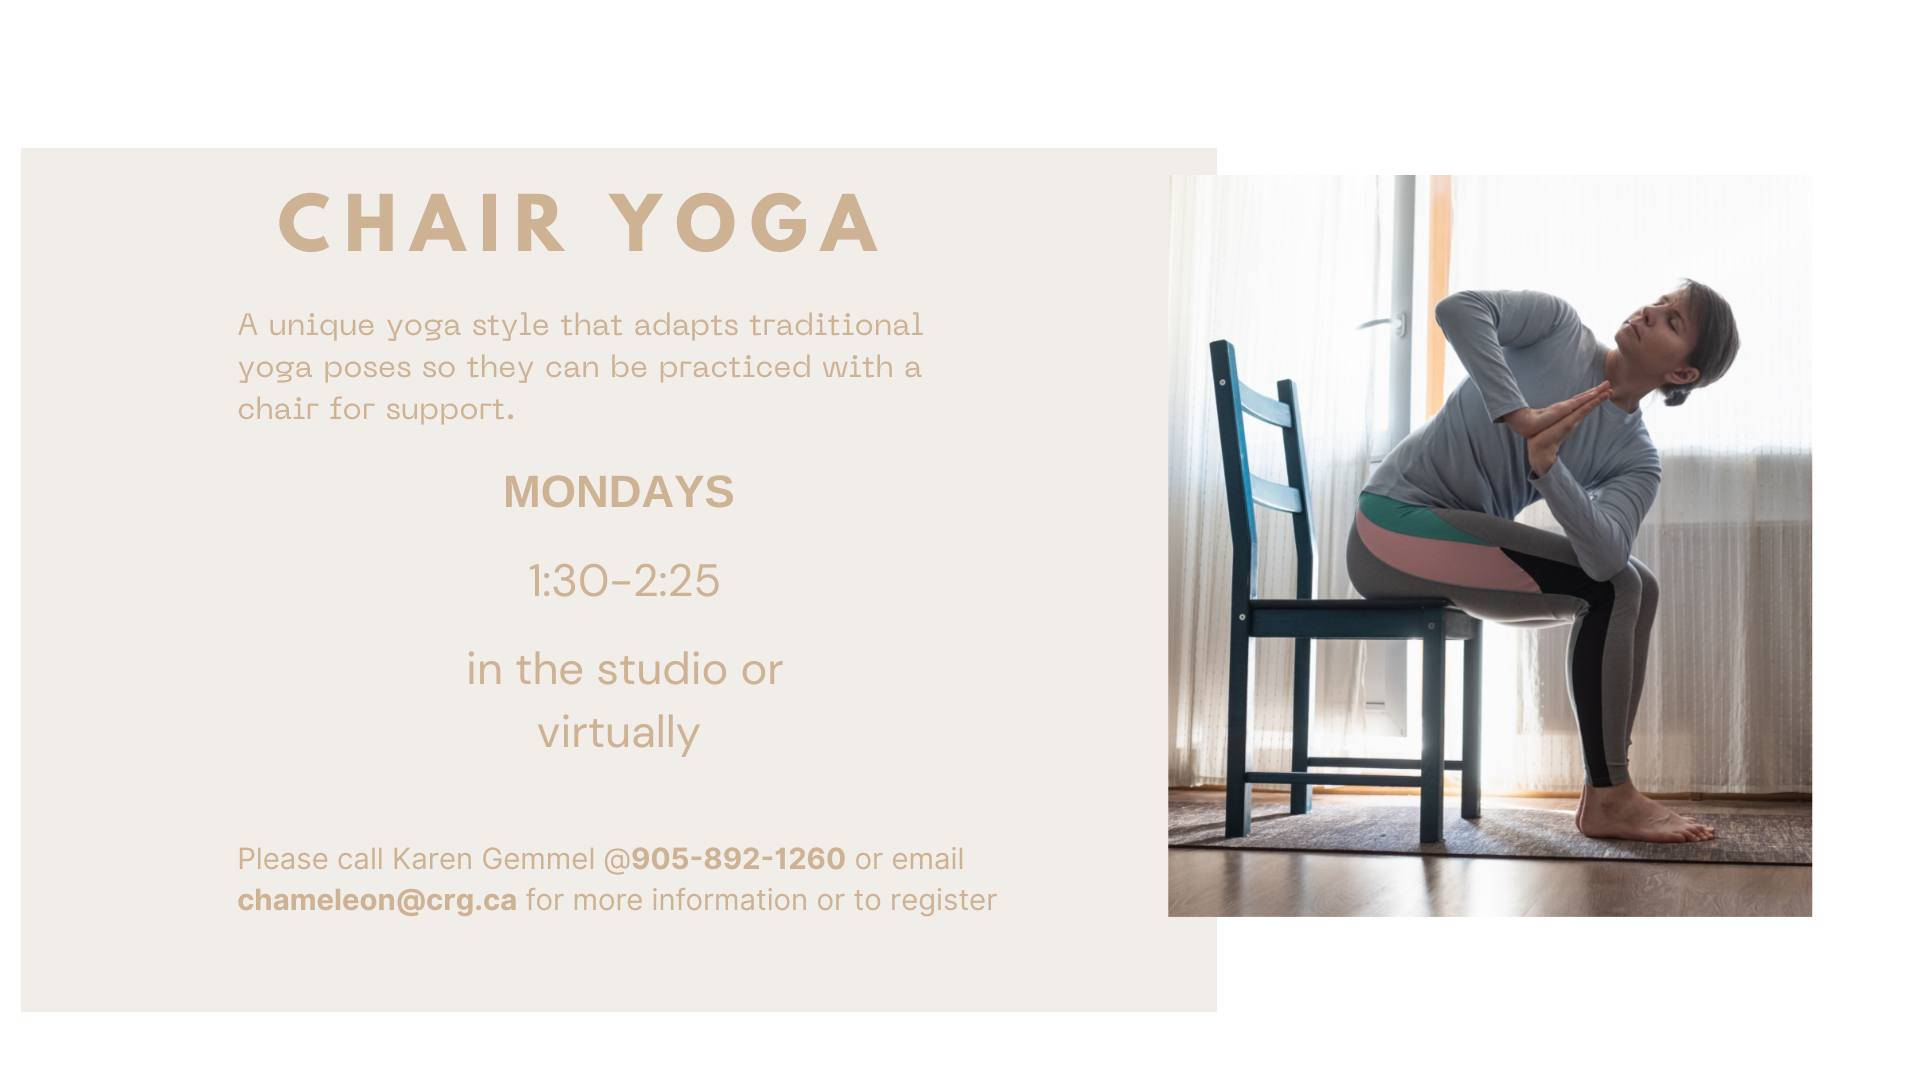 Ask the Experts: What is Chair Yoga?